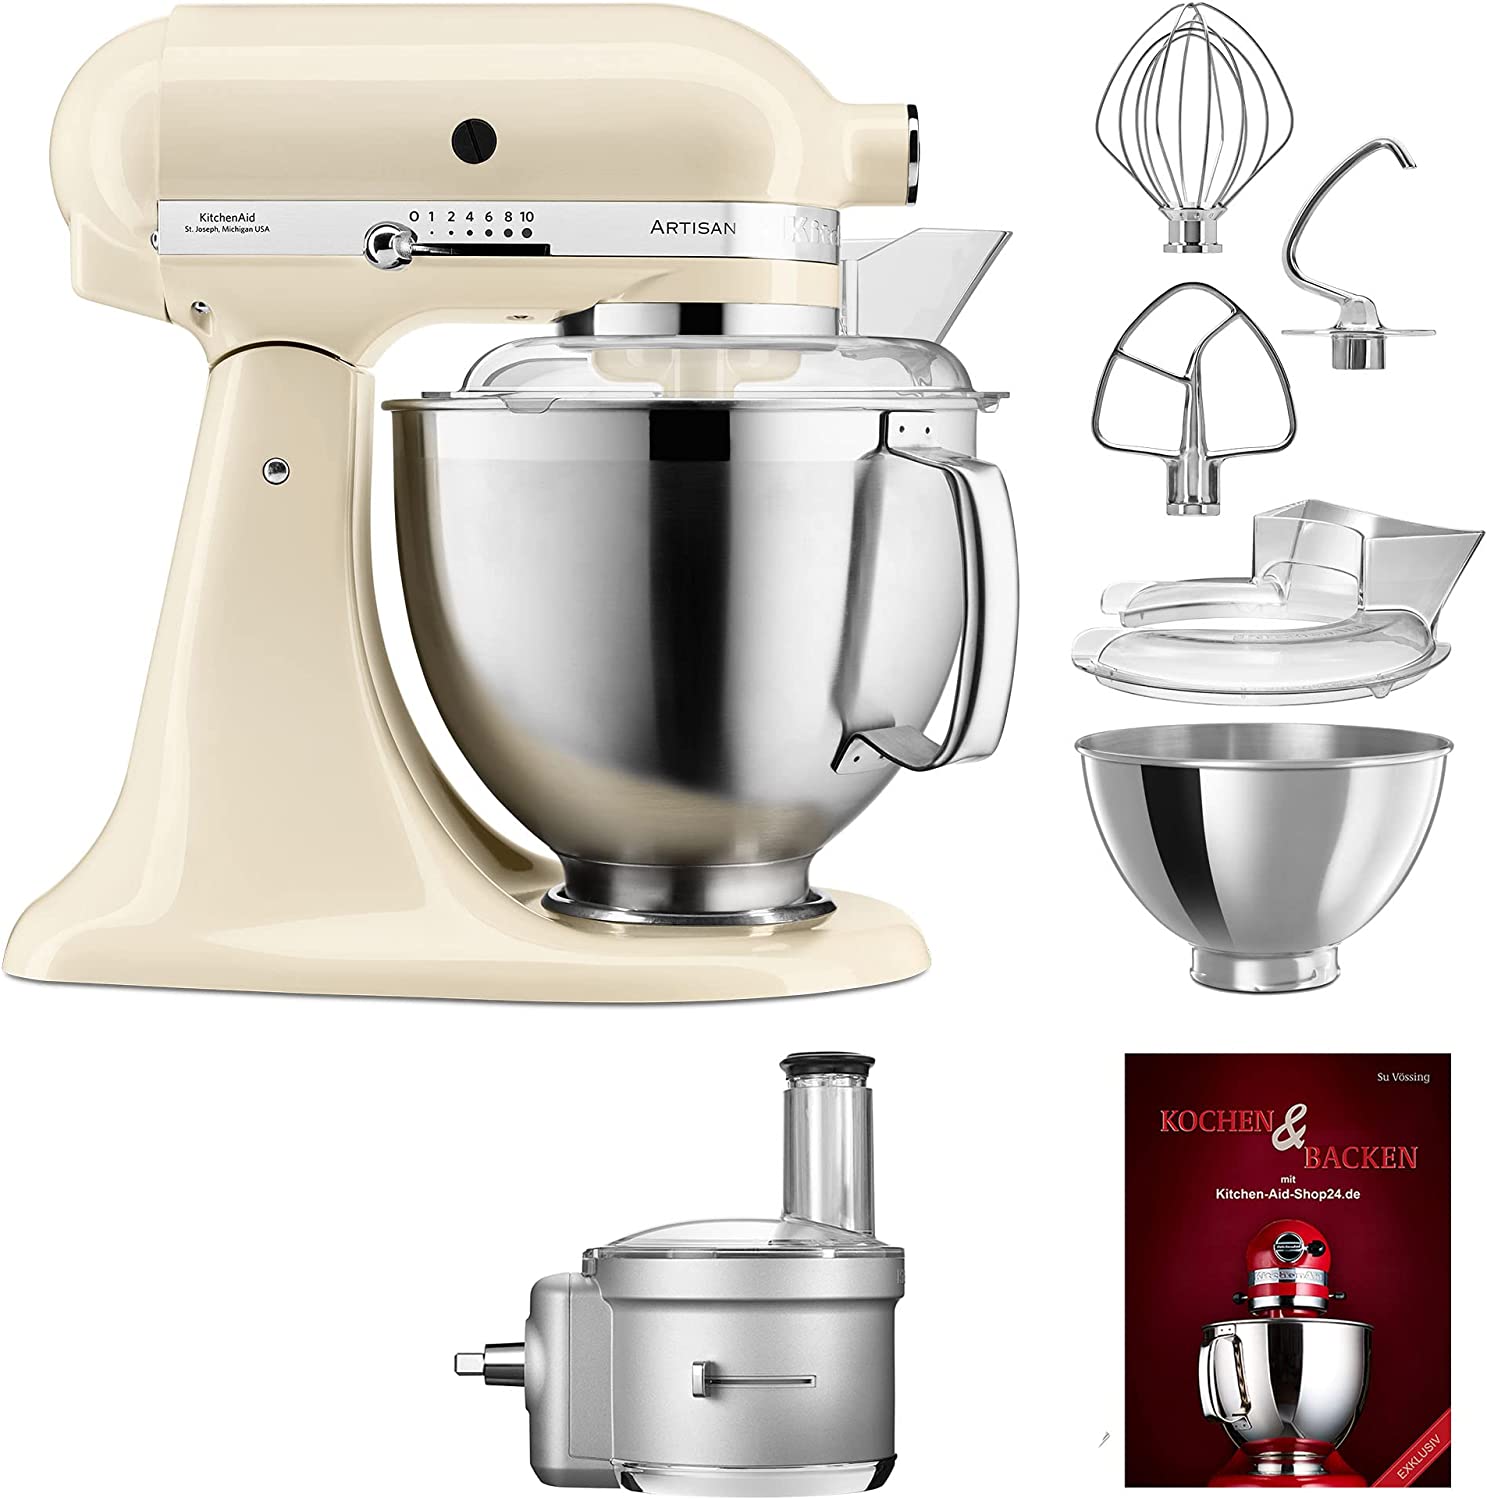 KitchenAid Artisan P26 Food Processor Starter Set 185 (FPV) - 5KSM185PSEAC with Food Processor Attachment (5KSM2FPA) and Cookbook (Cooking & Baking)